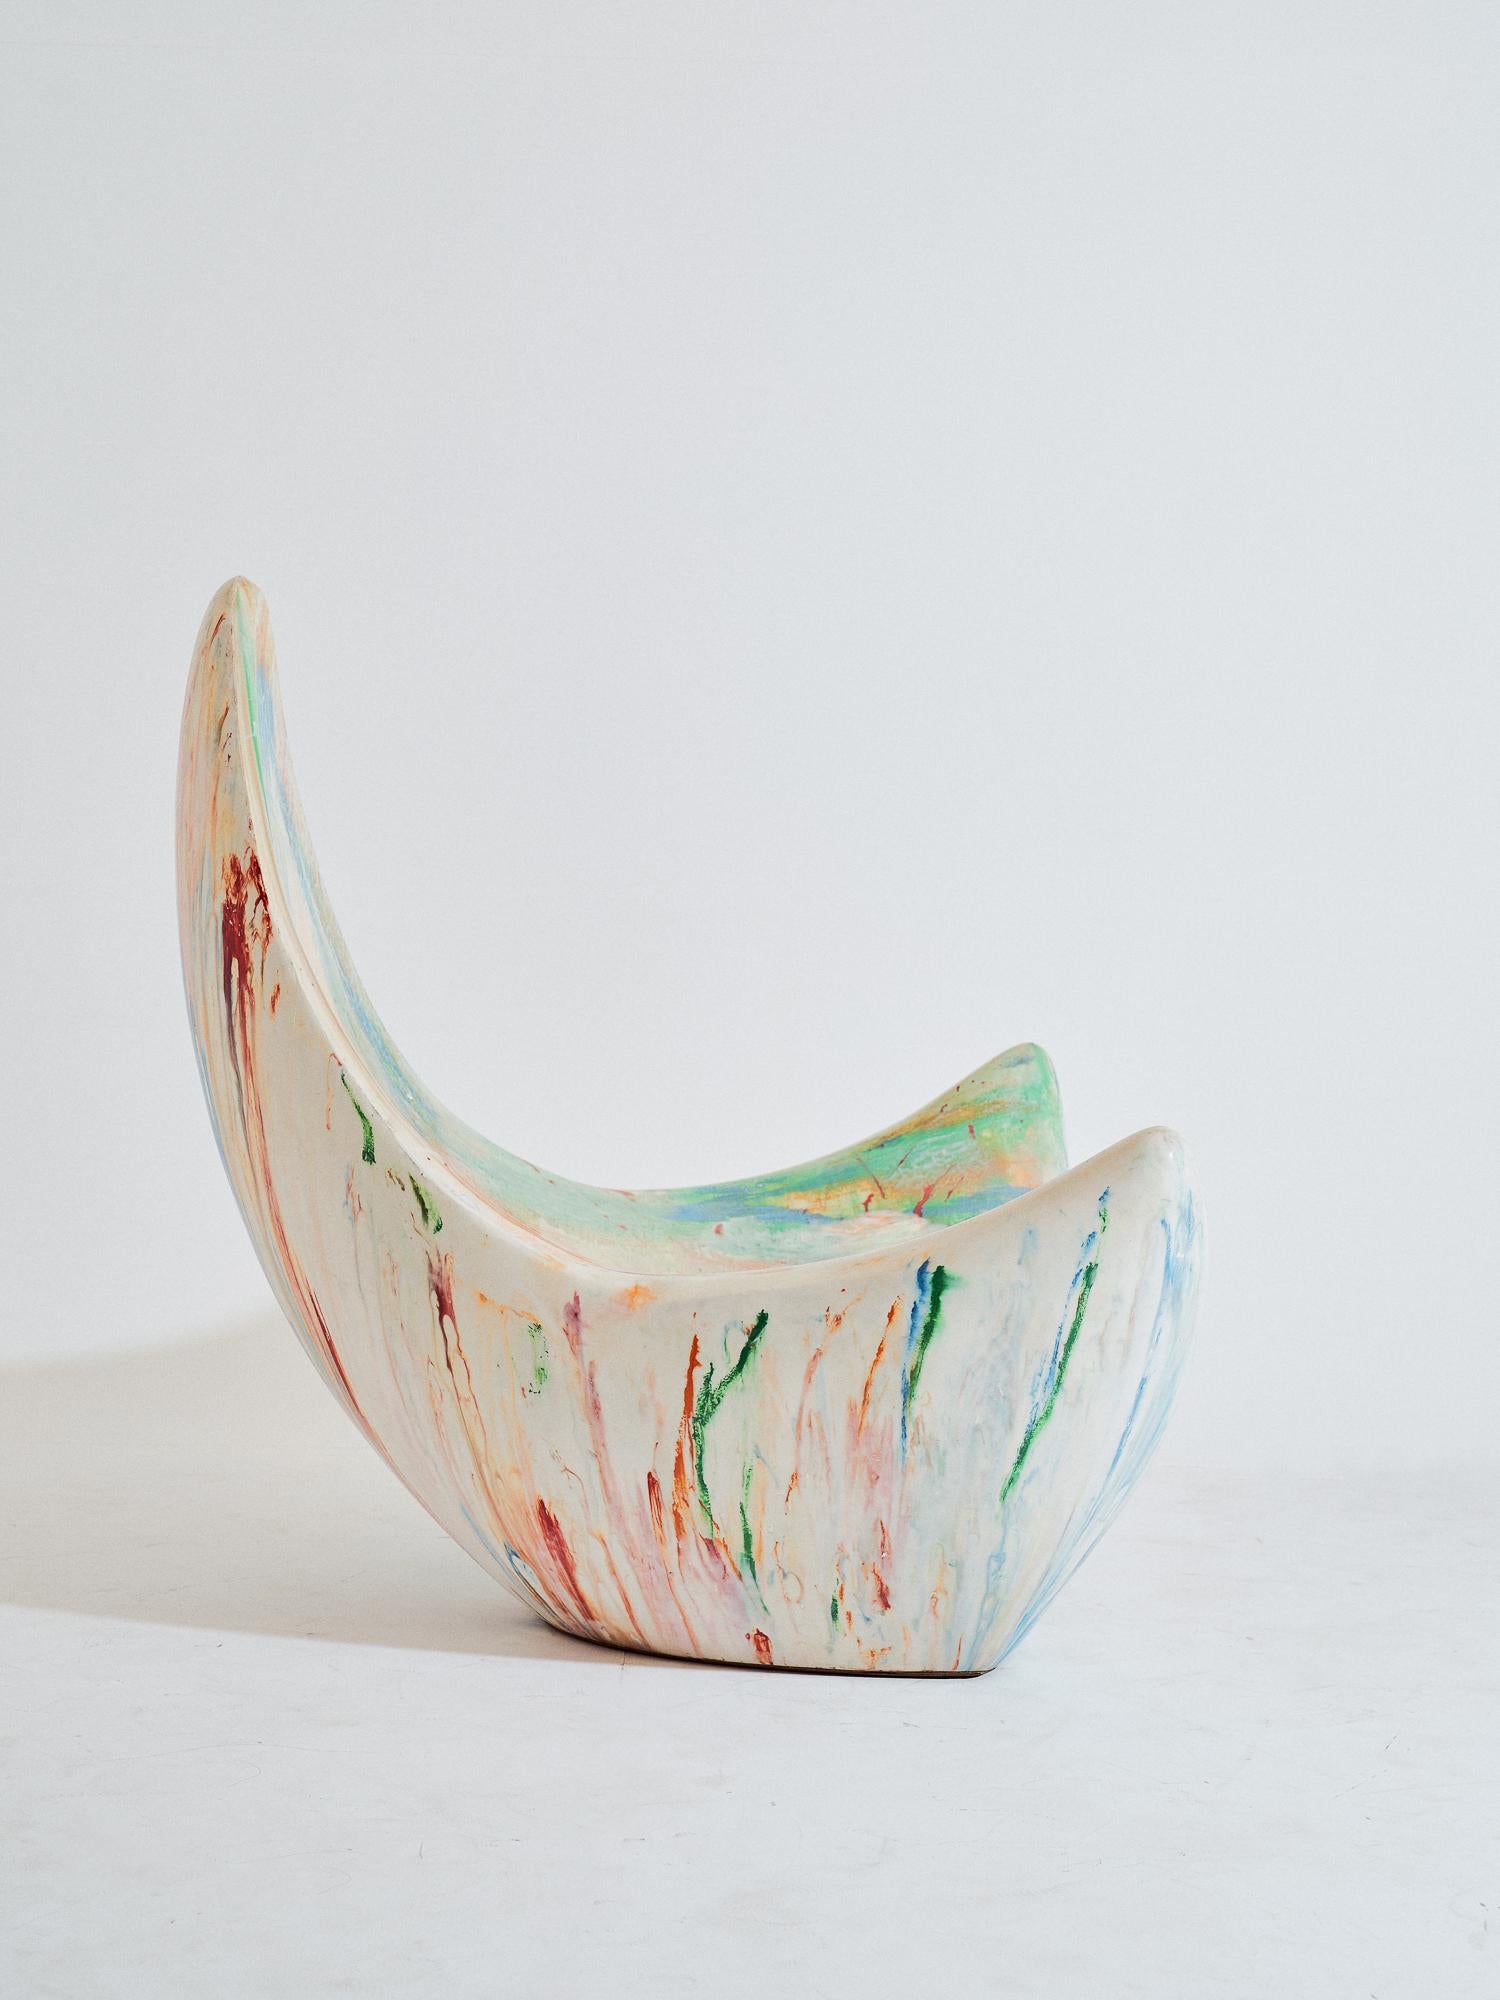 Contemporary, hand sculpted fiberglass armchair - Popcorn Armchair by Kunaal Kyhaan. The sensual form, is cast in a sculpted Rainbow finish, organically created using dyes during the fiberglass casting process. Layers of fiber are hand moulded by